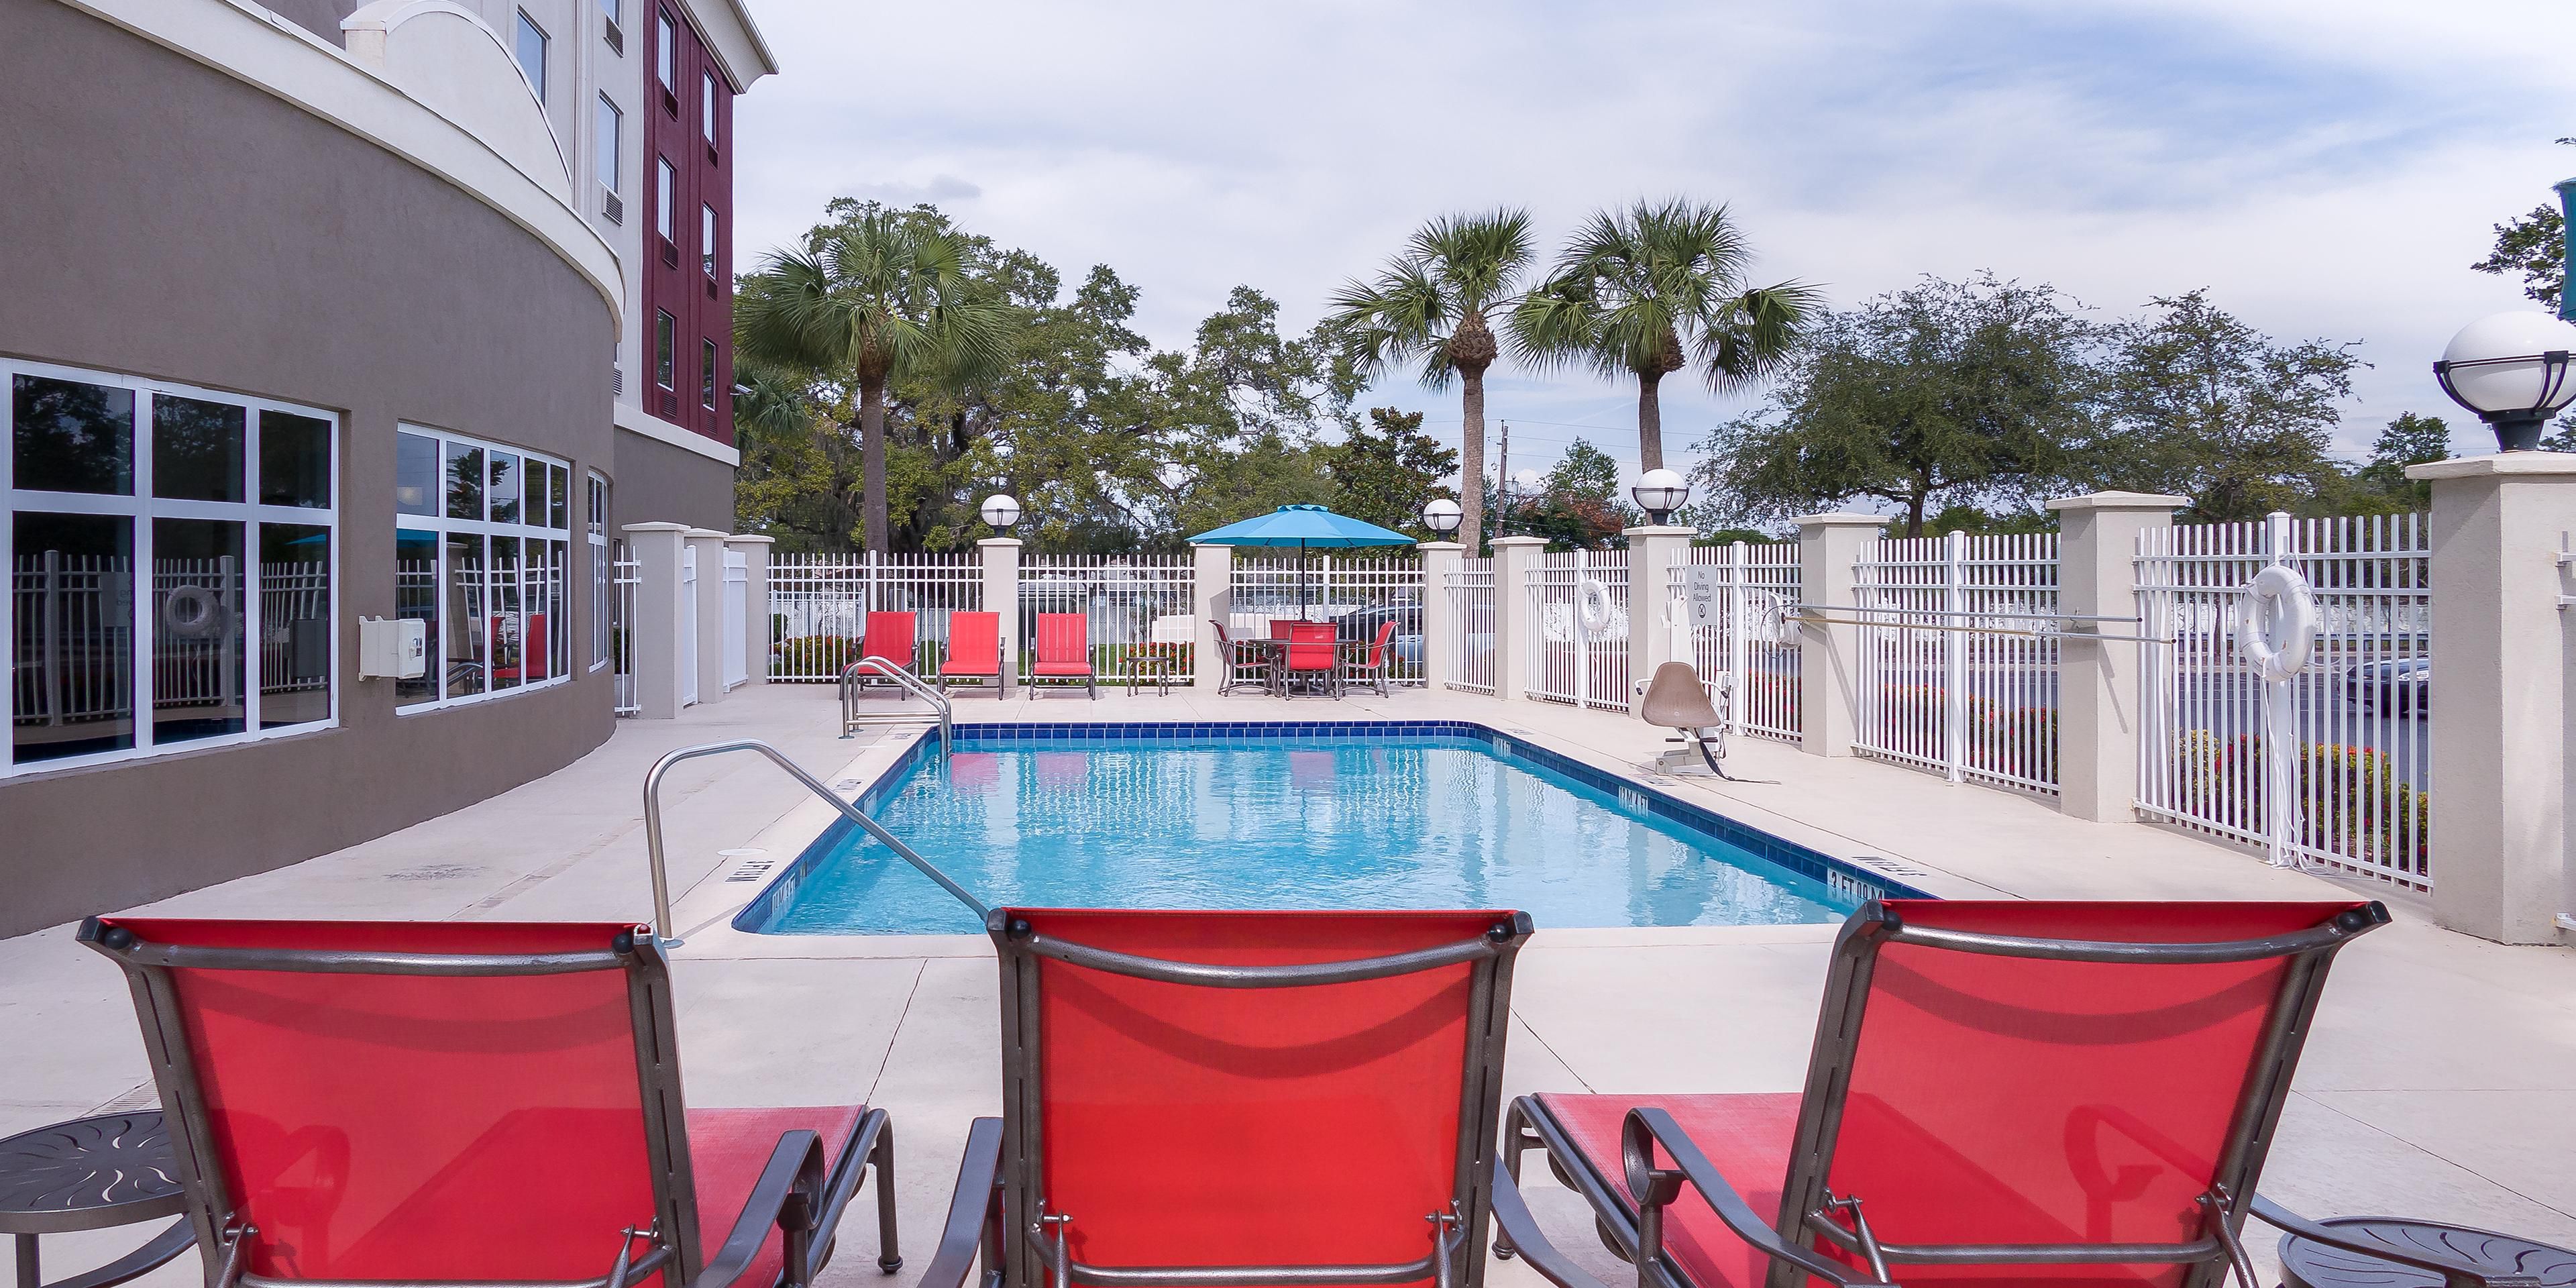 Enjoy the beautiful Florida Sunshine during your travels by relaxing at our outdoor pool and patio.